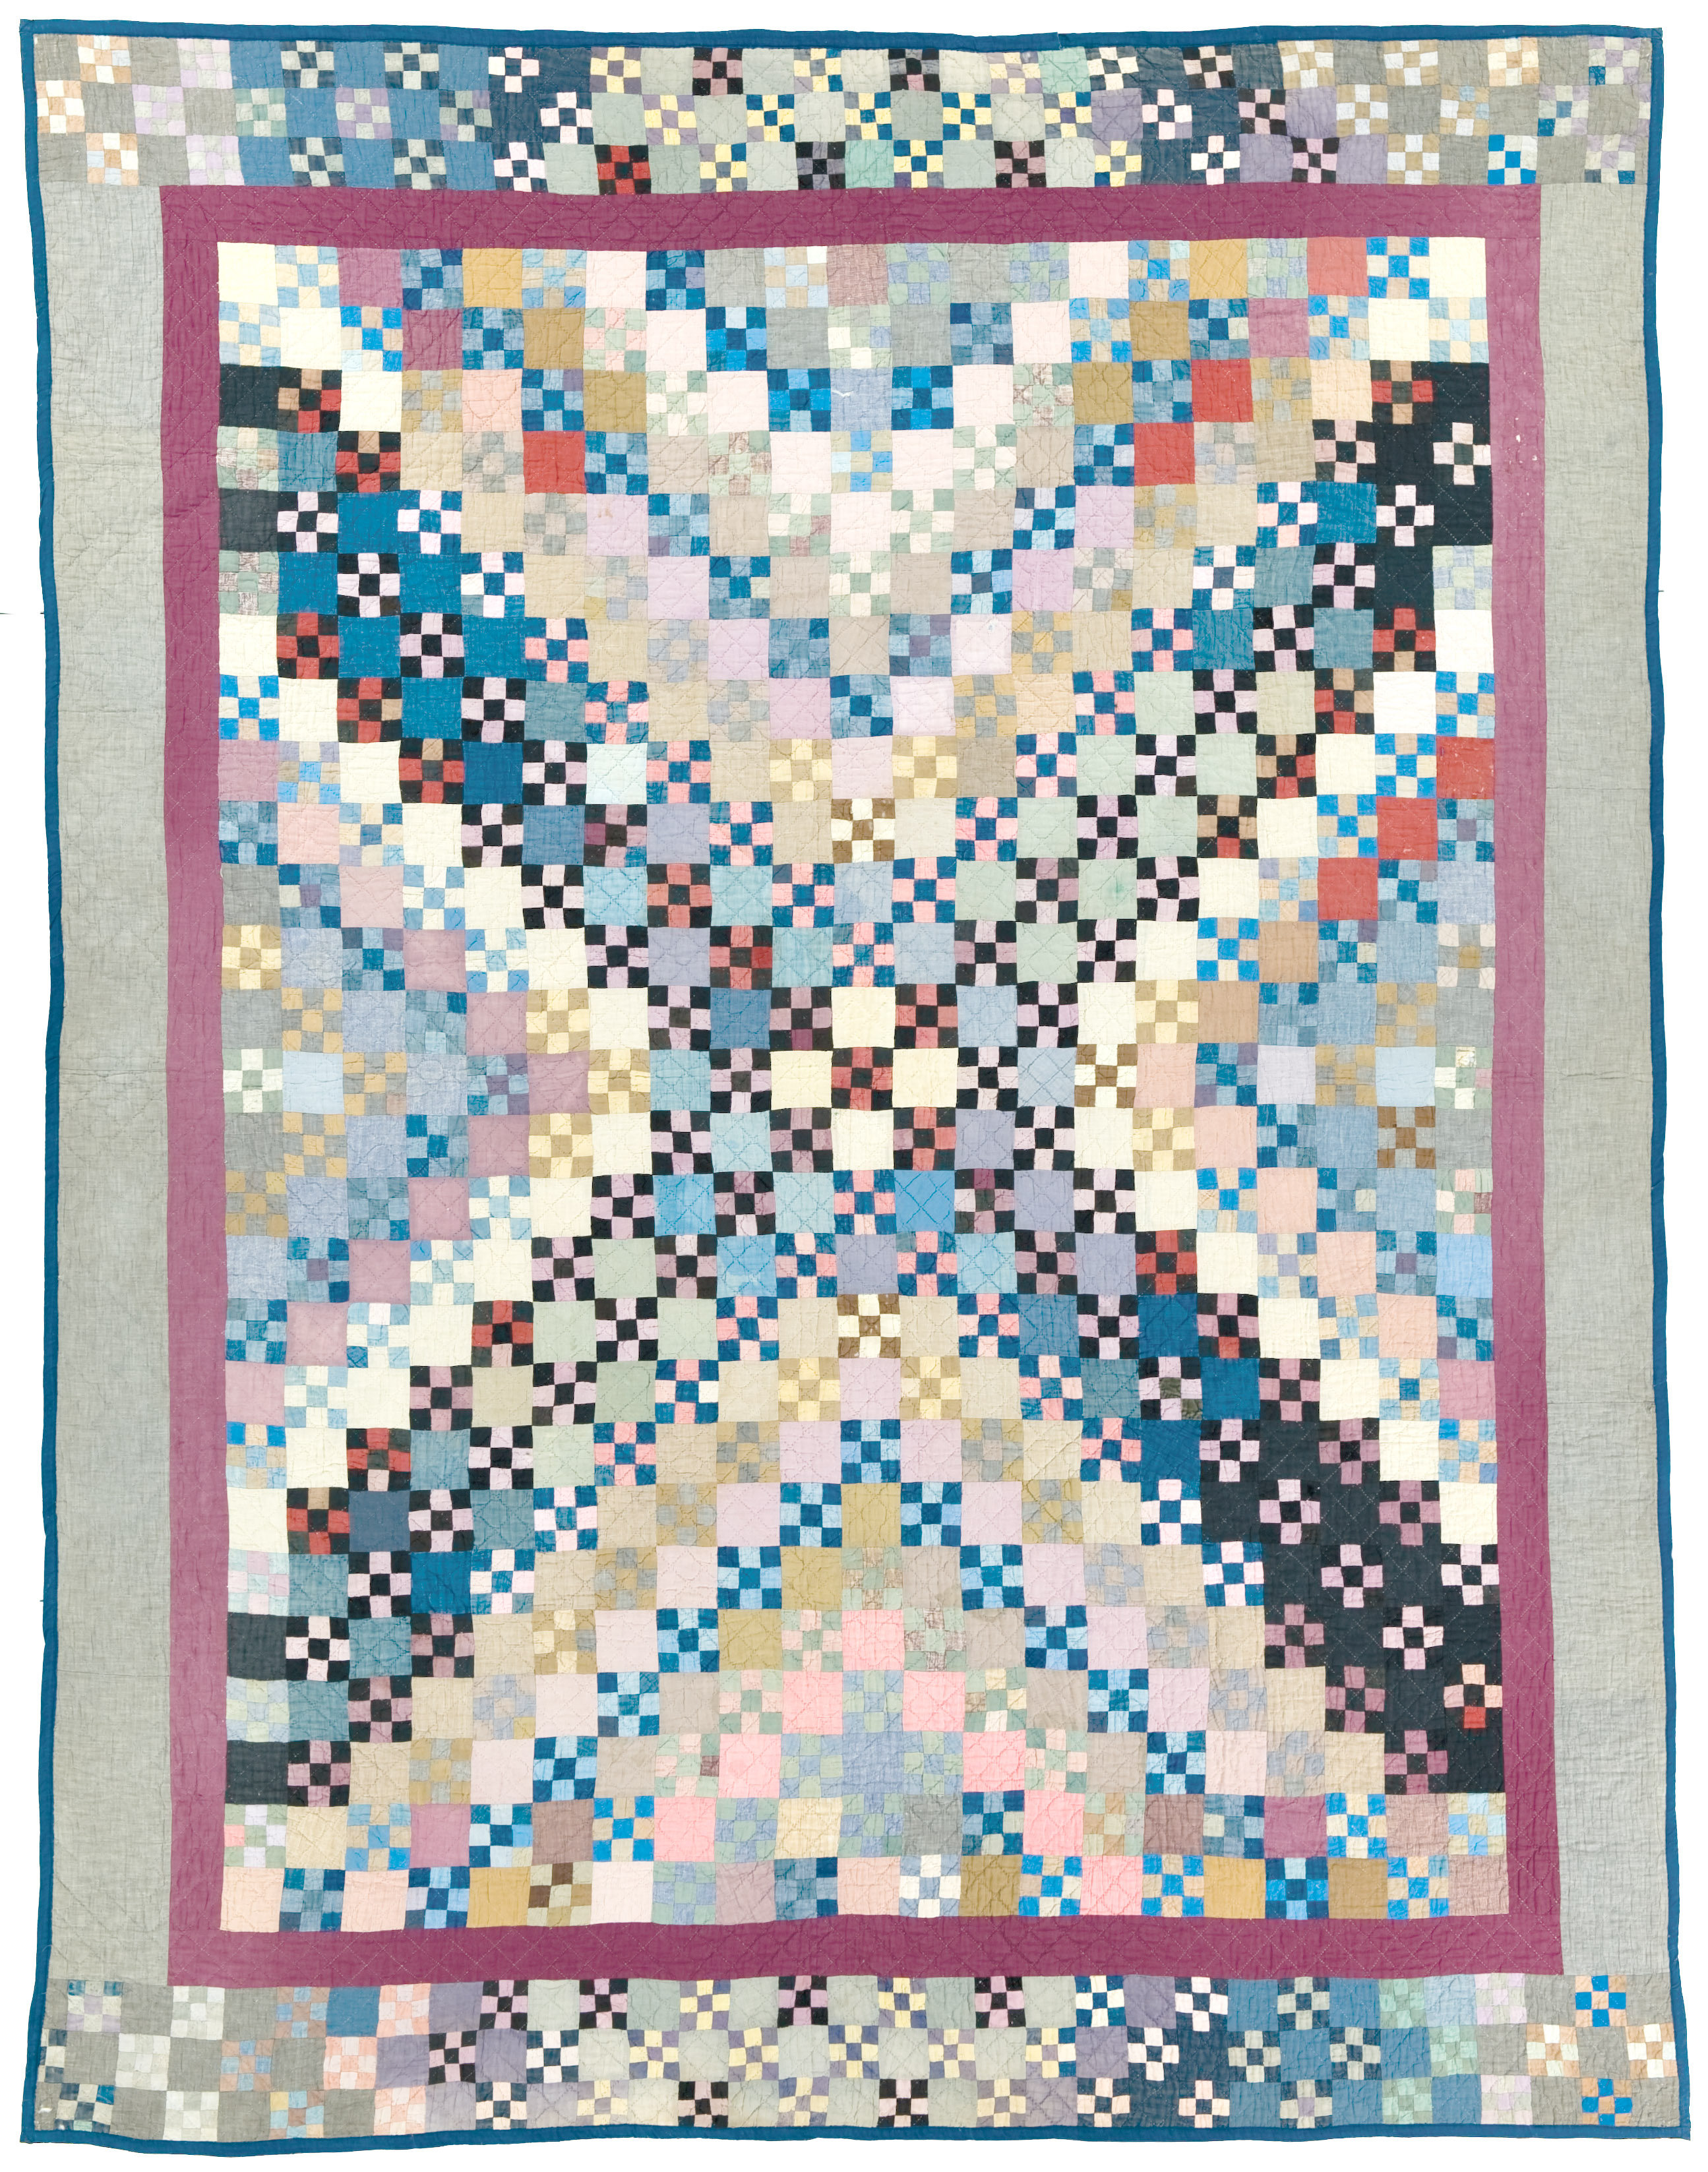 Nine Patch, made by Barbara Yoder in Weatherford, Oklahoma, circa 1920, is one of the quilts on display in "Amish Quilts and the Crafting of Diverse Traditions" at the International Quilt Study Center & Museum.